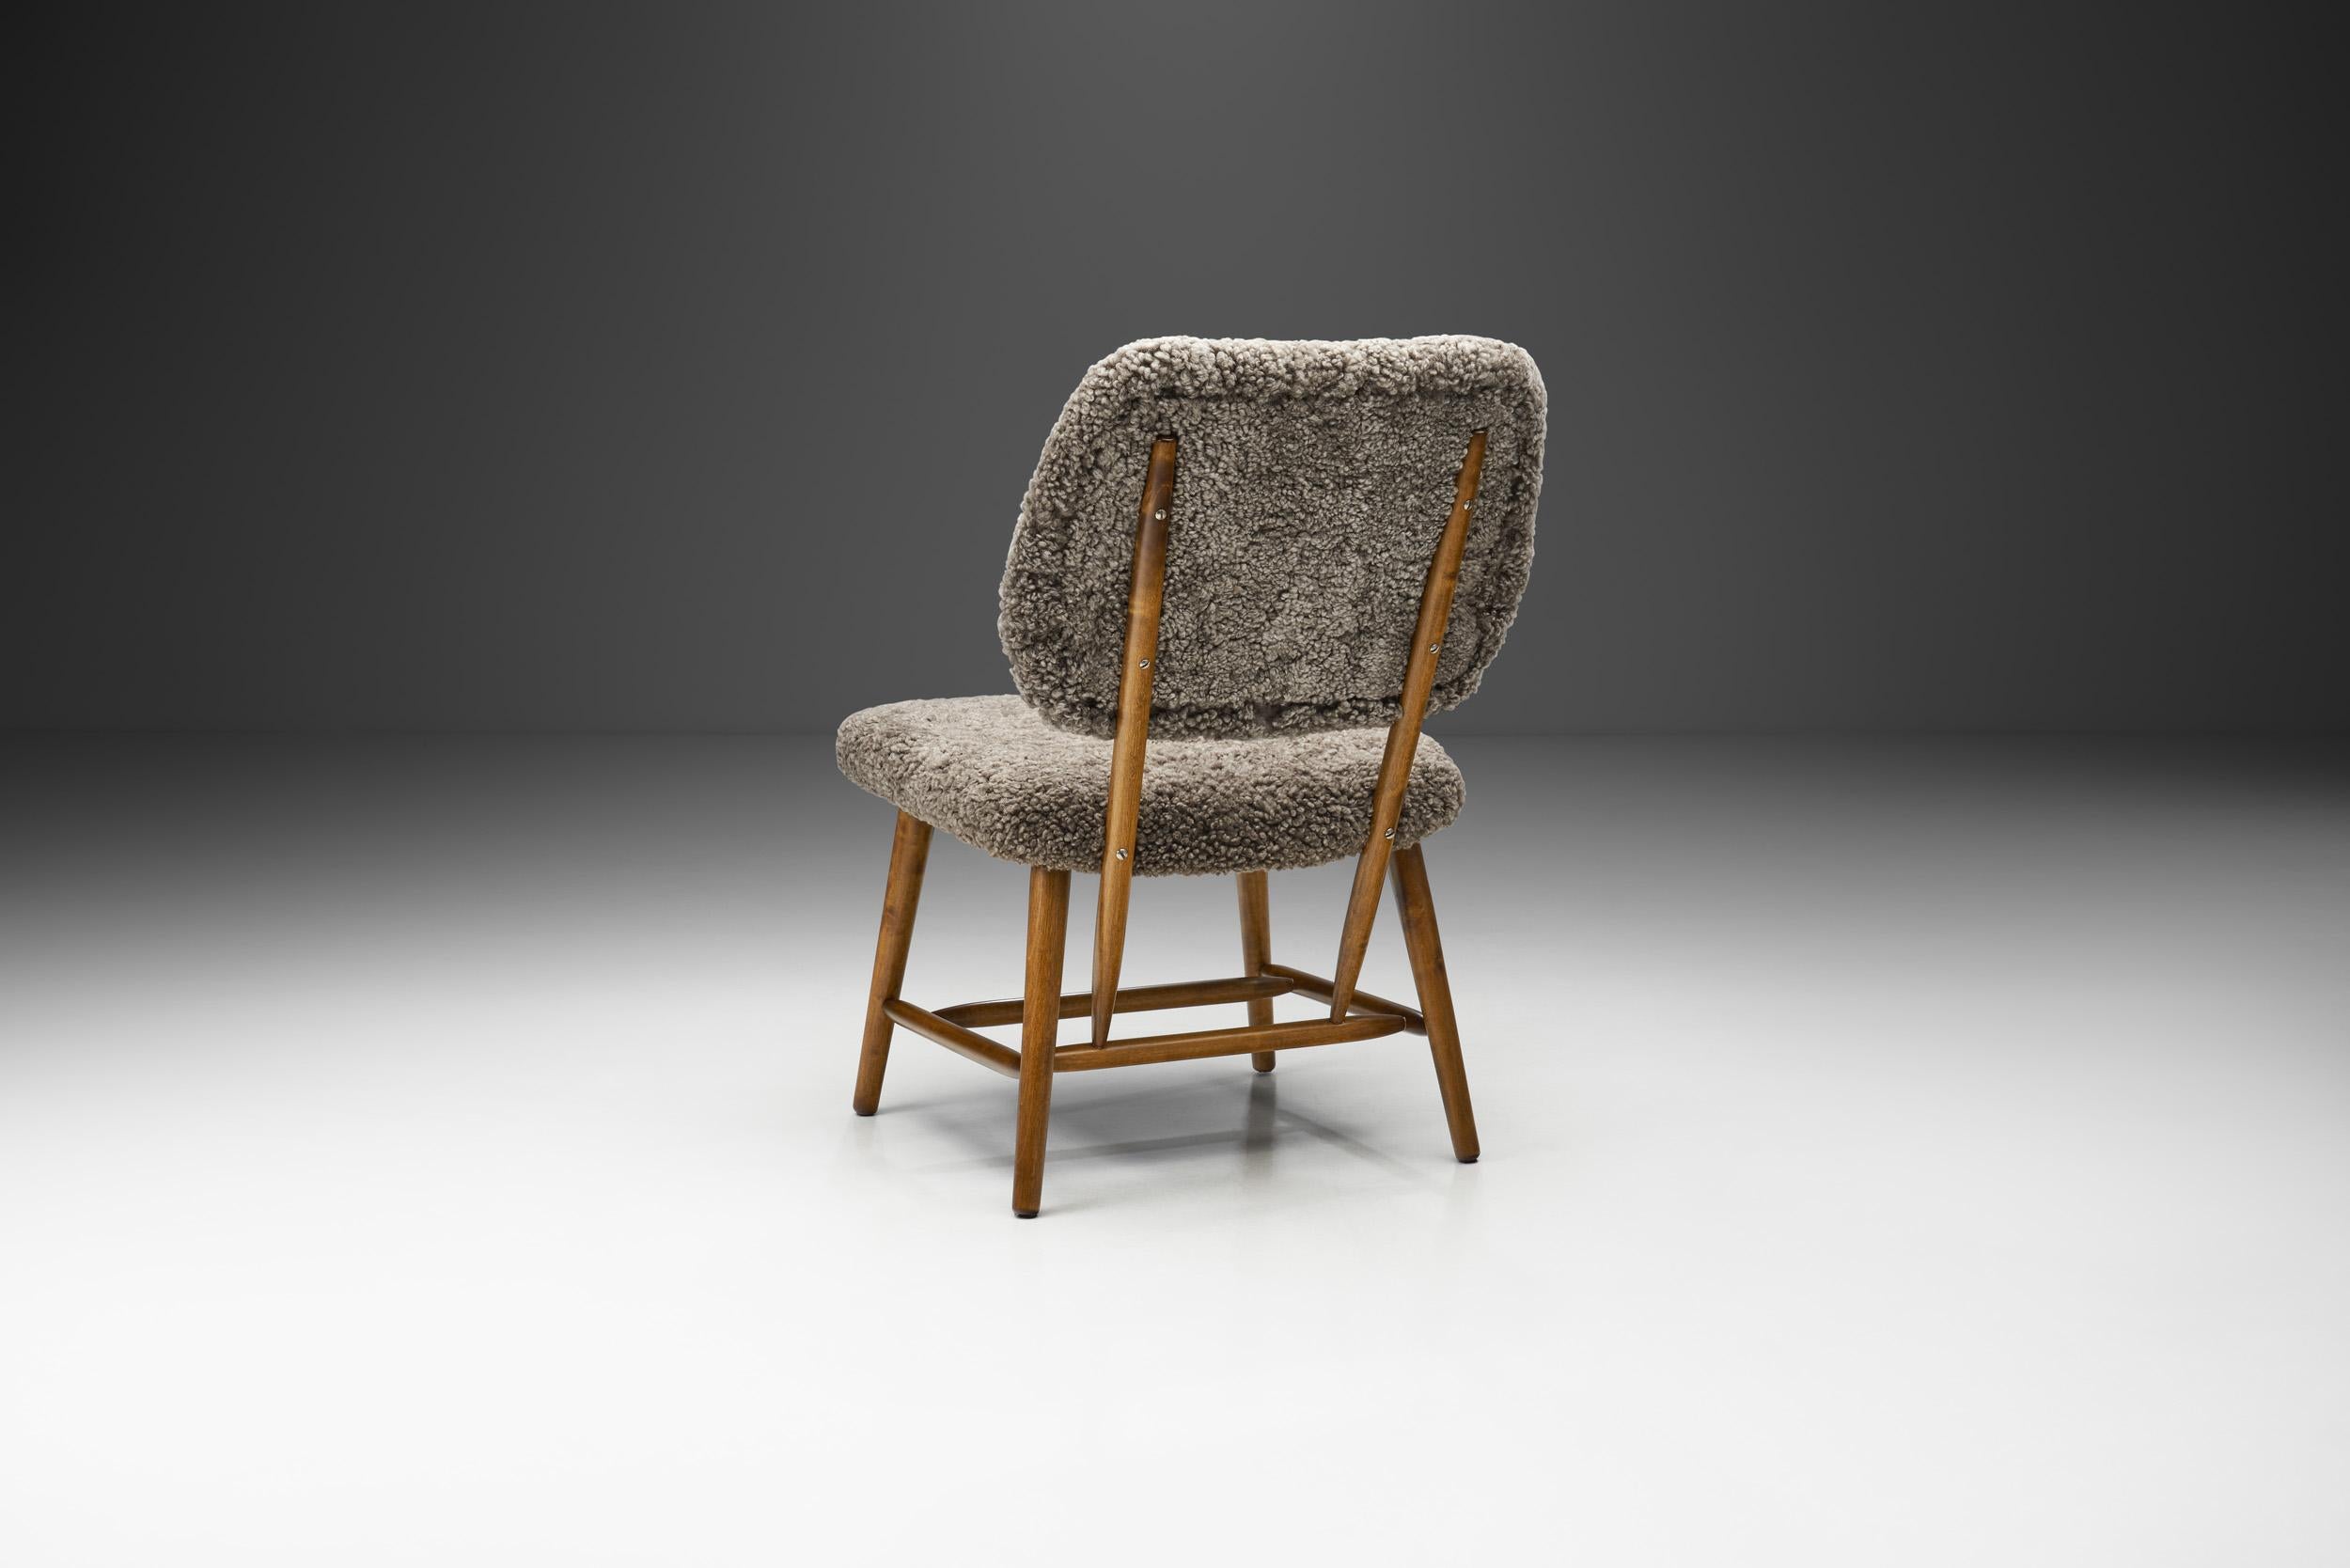 Mid-20th Century Swedish Mid-Century Easy Chair with Sheepskin, Sweden 1950s For Sale